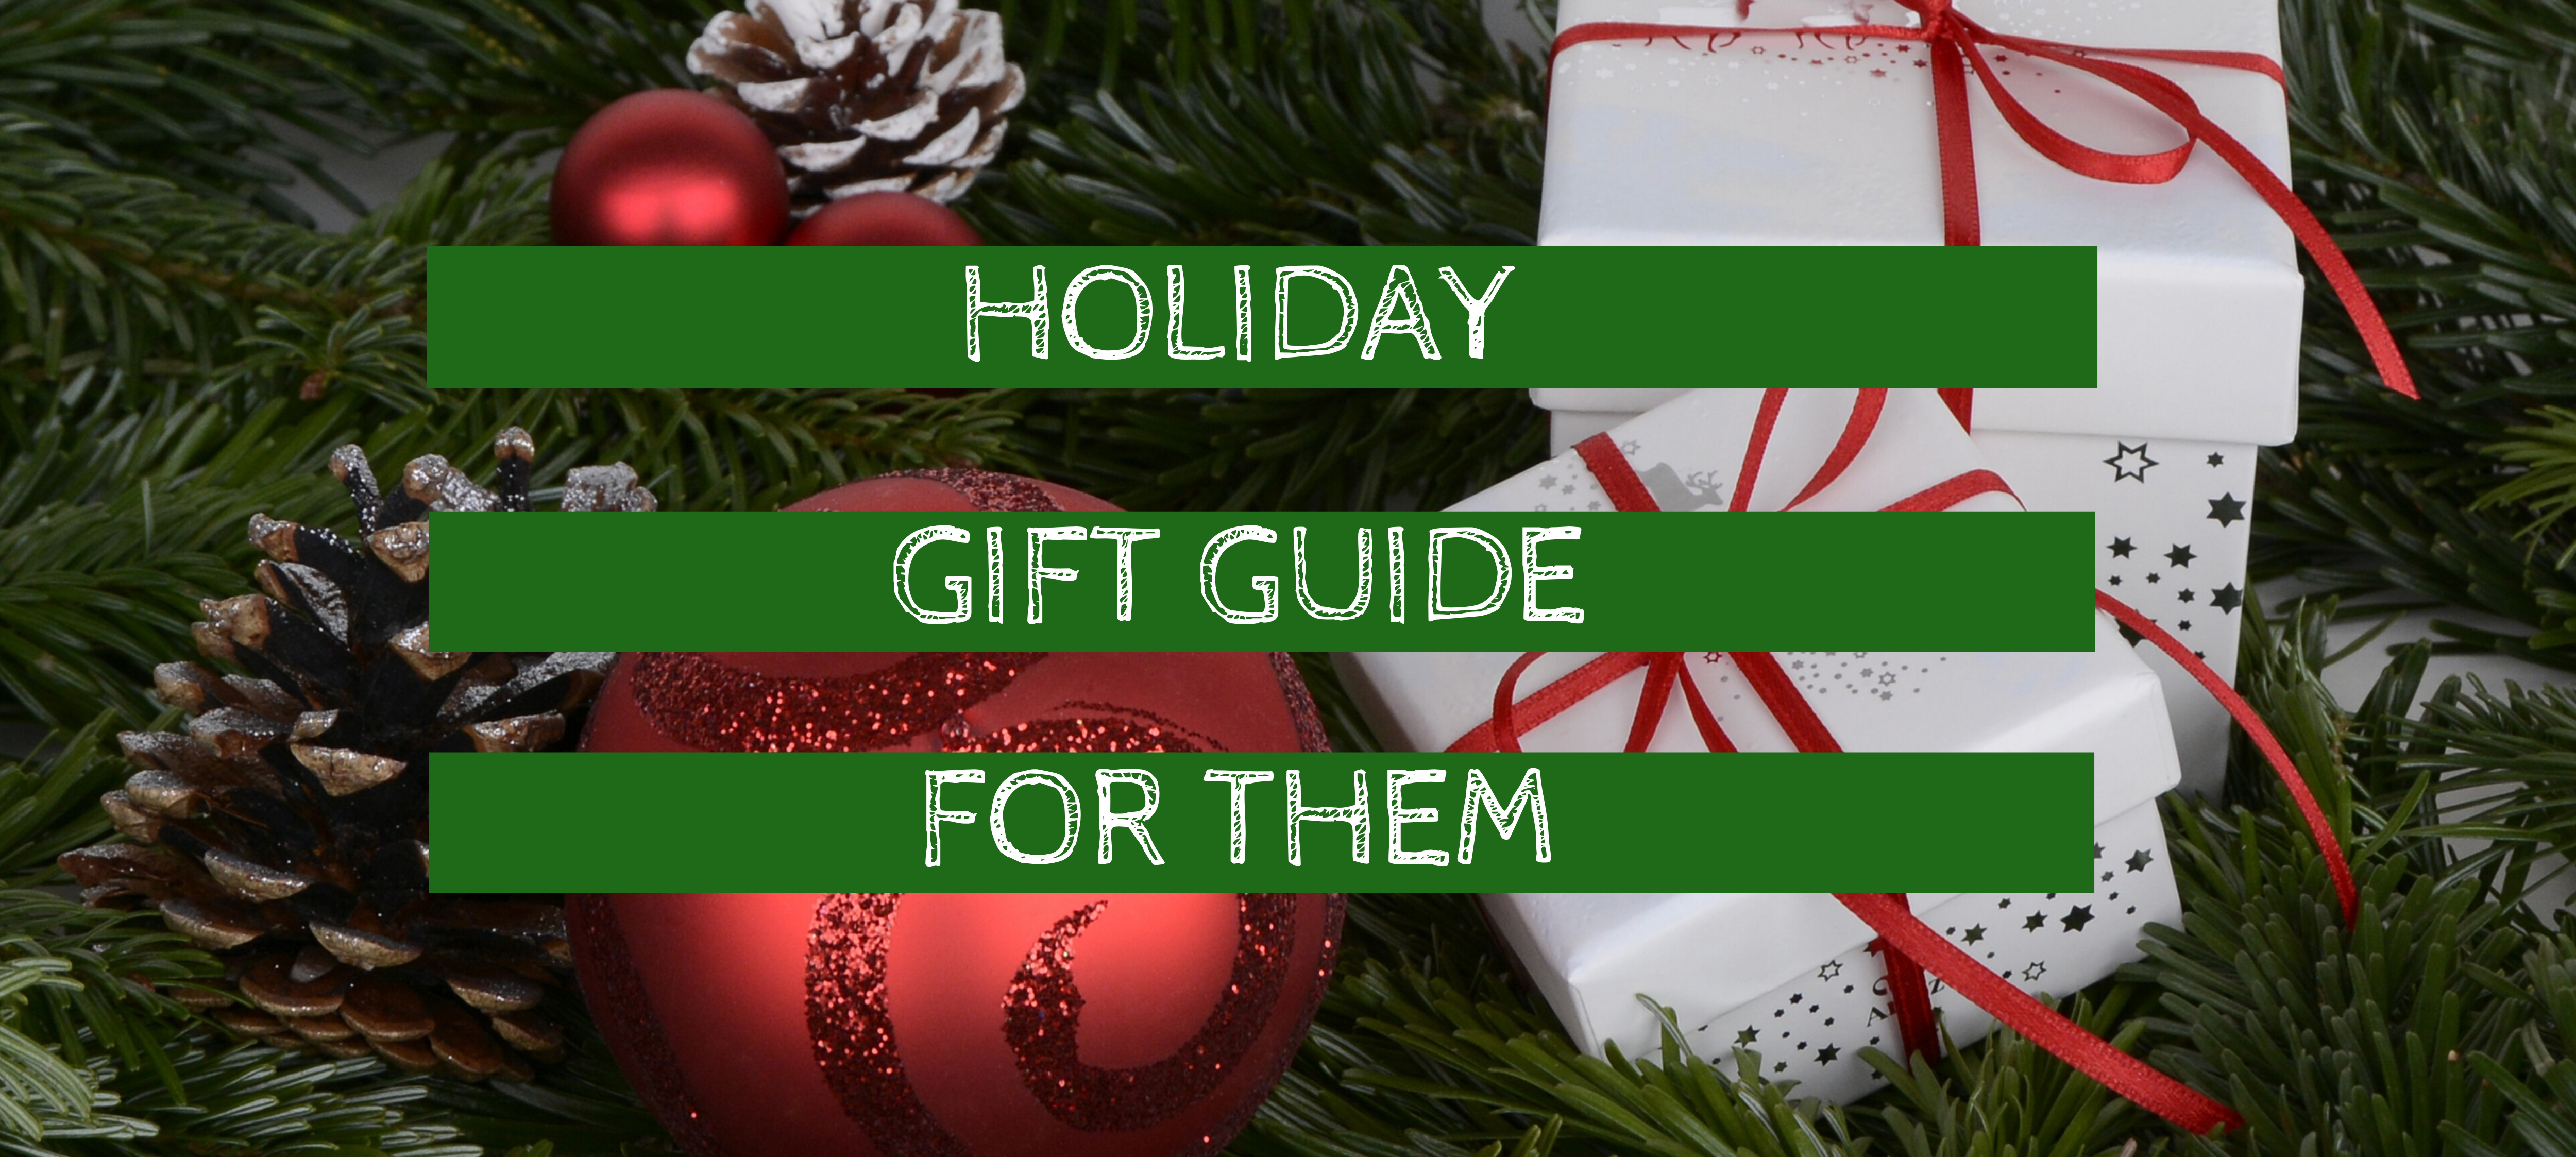 Holiday kids gift guide